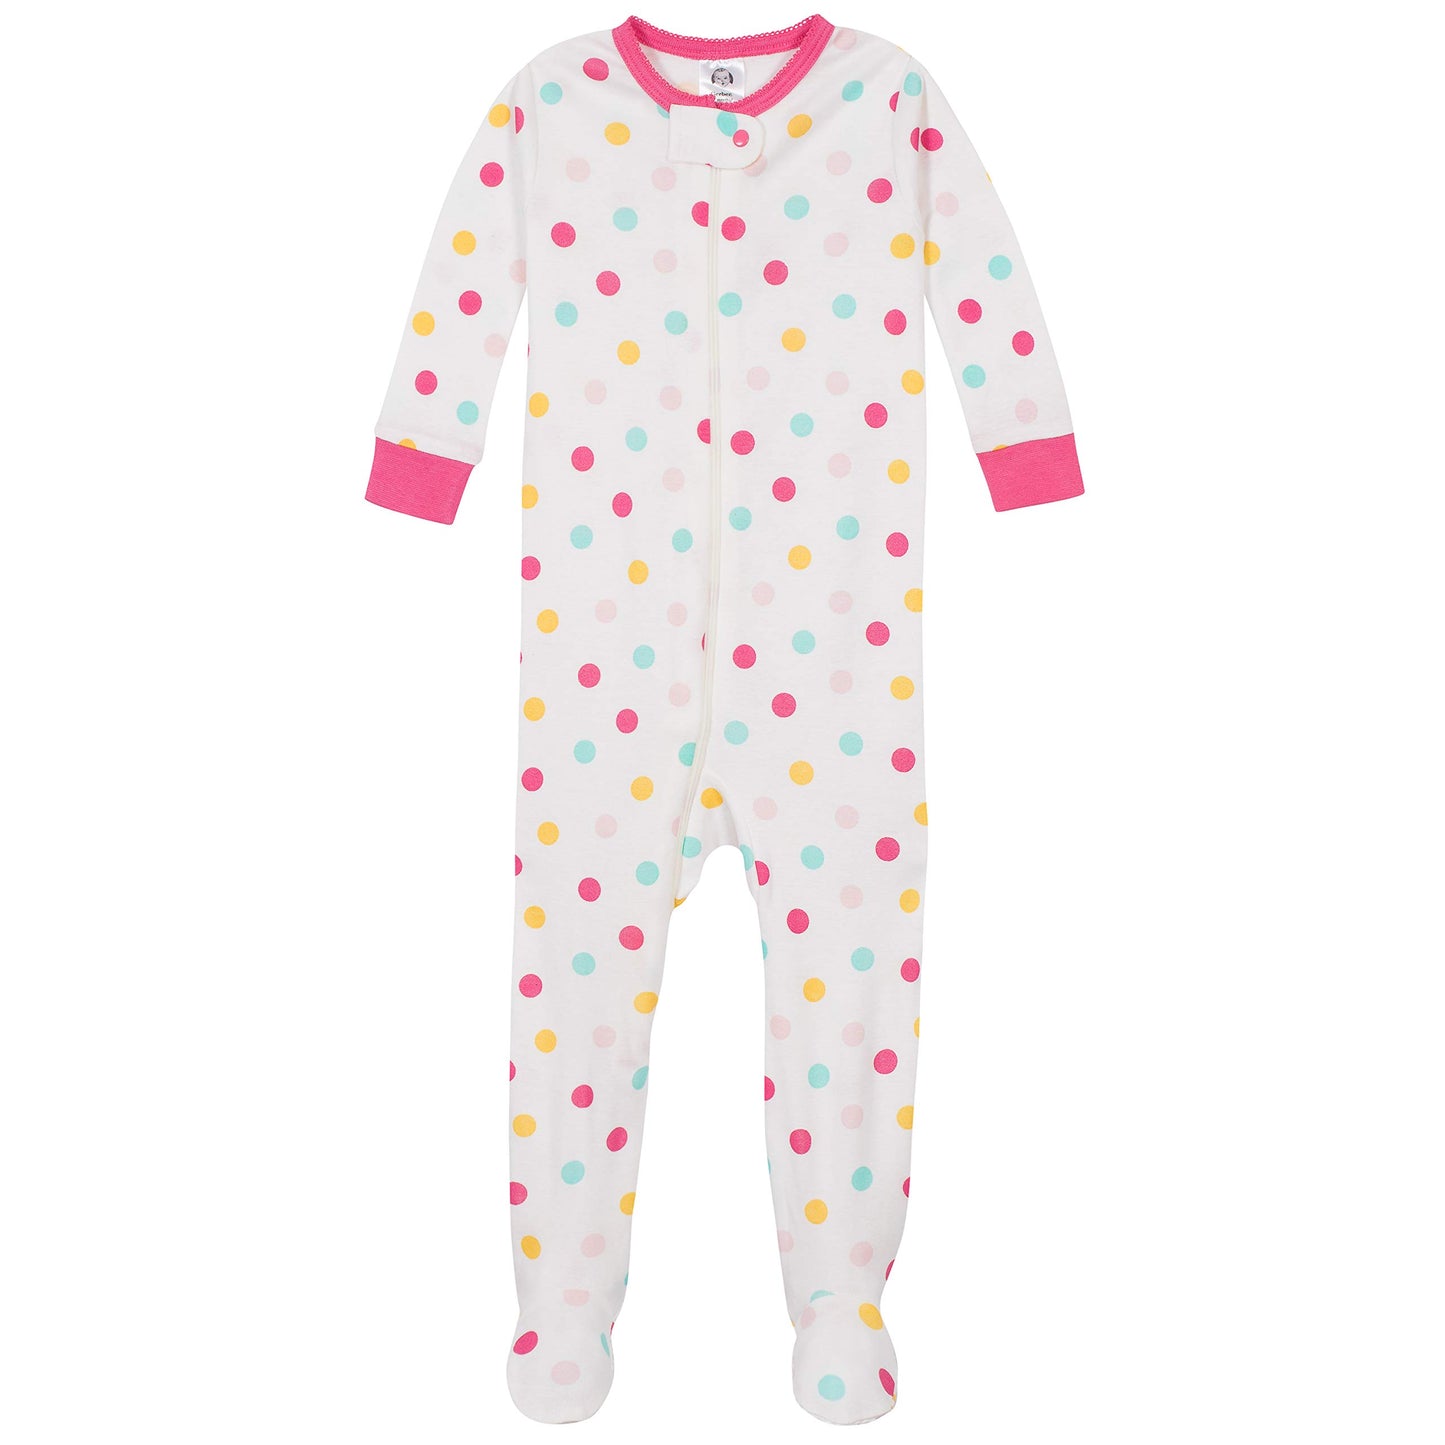 Gerber baby-girls 4-pack Footed Pajamas Baby and Toddler Sleepers(0-3M)